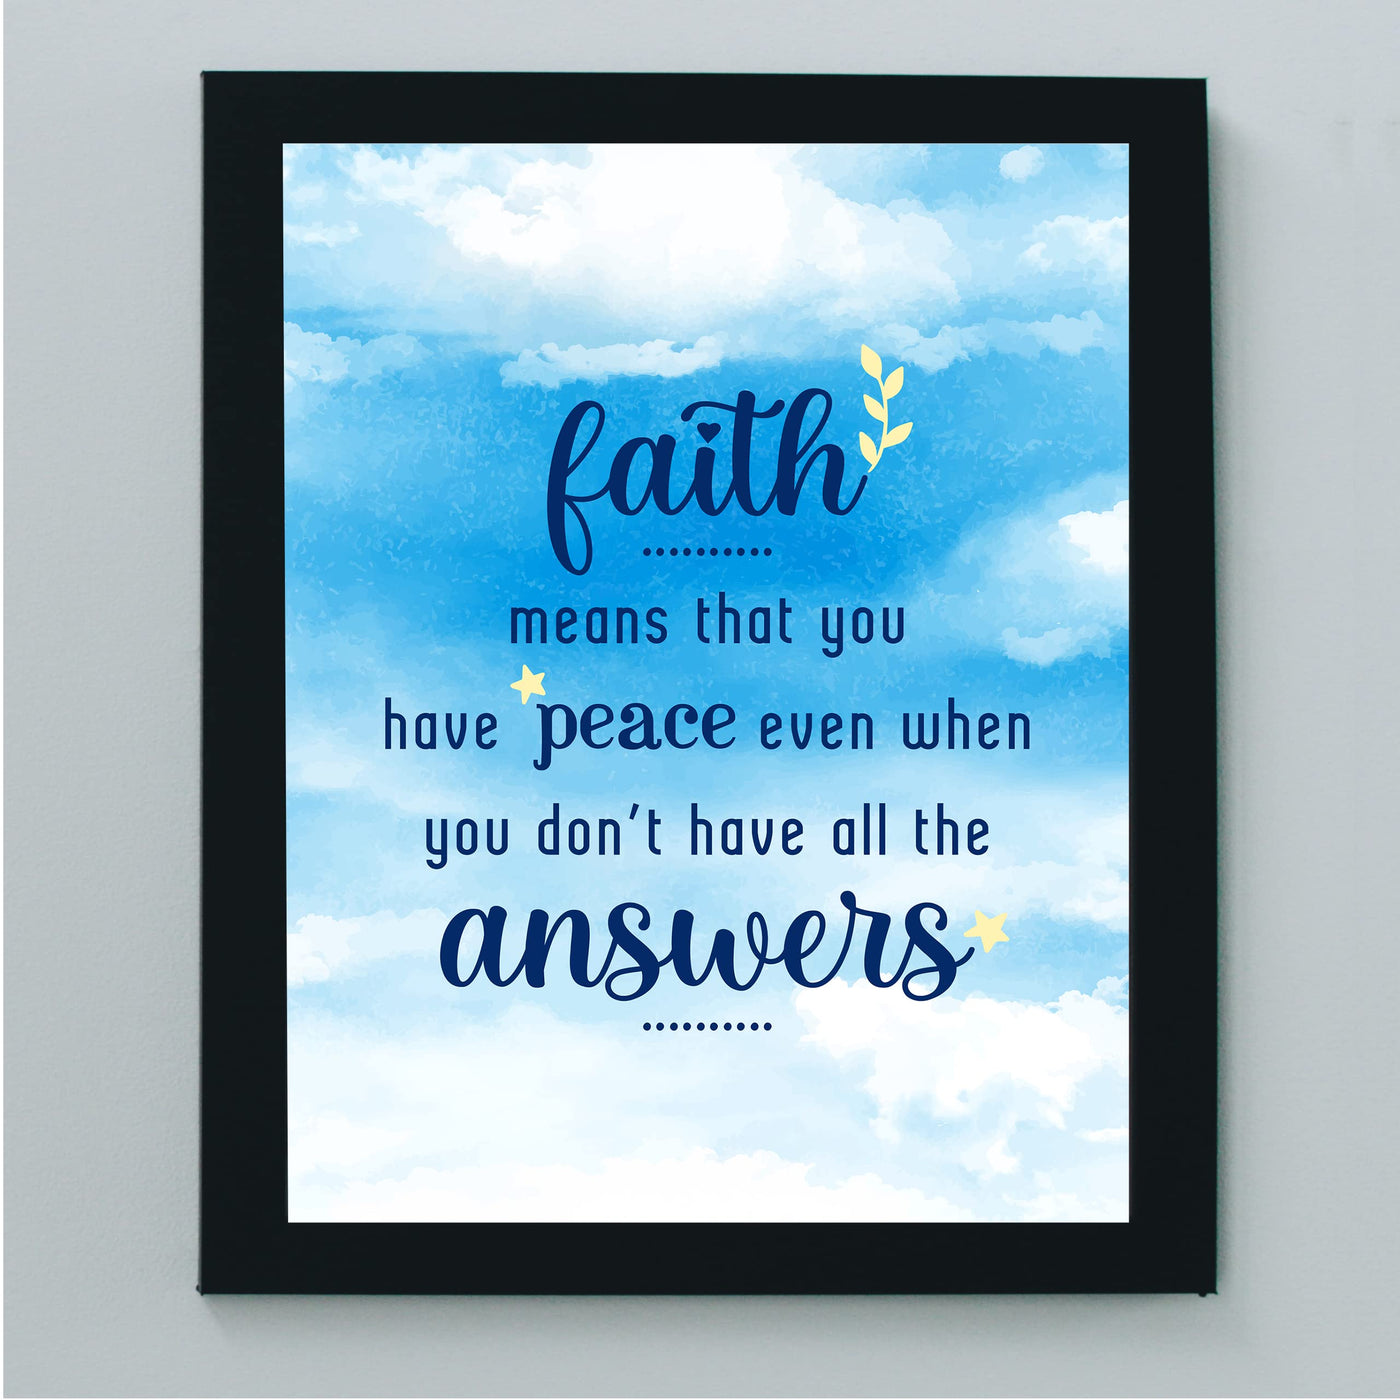 Faith Means You Have Peace When Don't Have Answers Inspirational Christian Quotes Wall Art -8x10" Spiritual Typography Print-Ready to Frame. Home-Office-Church-School Decor. Great Gift & Reminder!